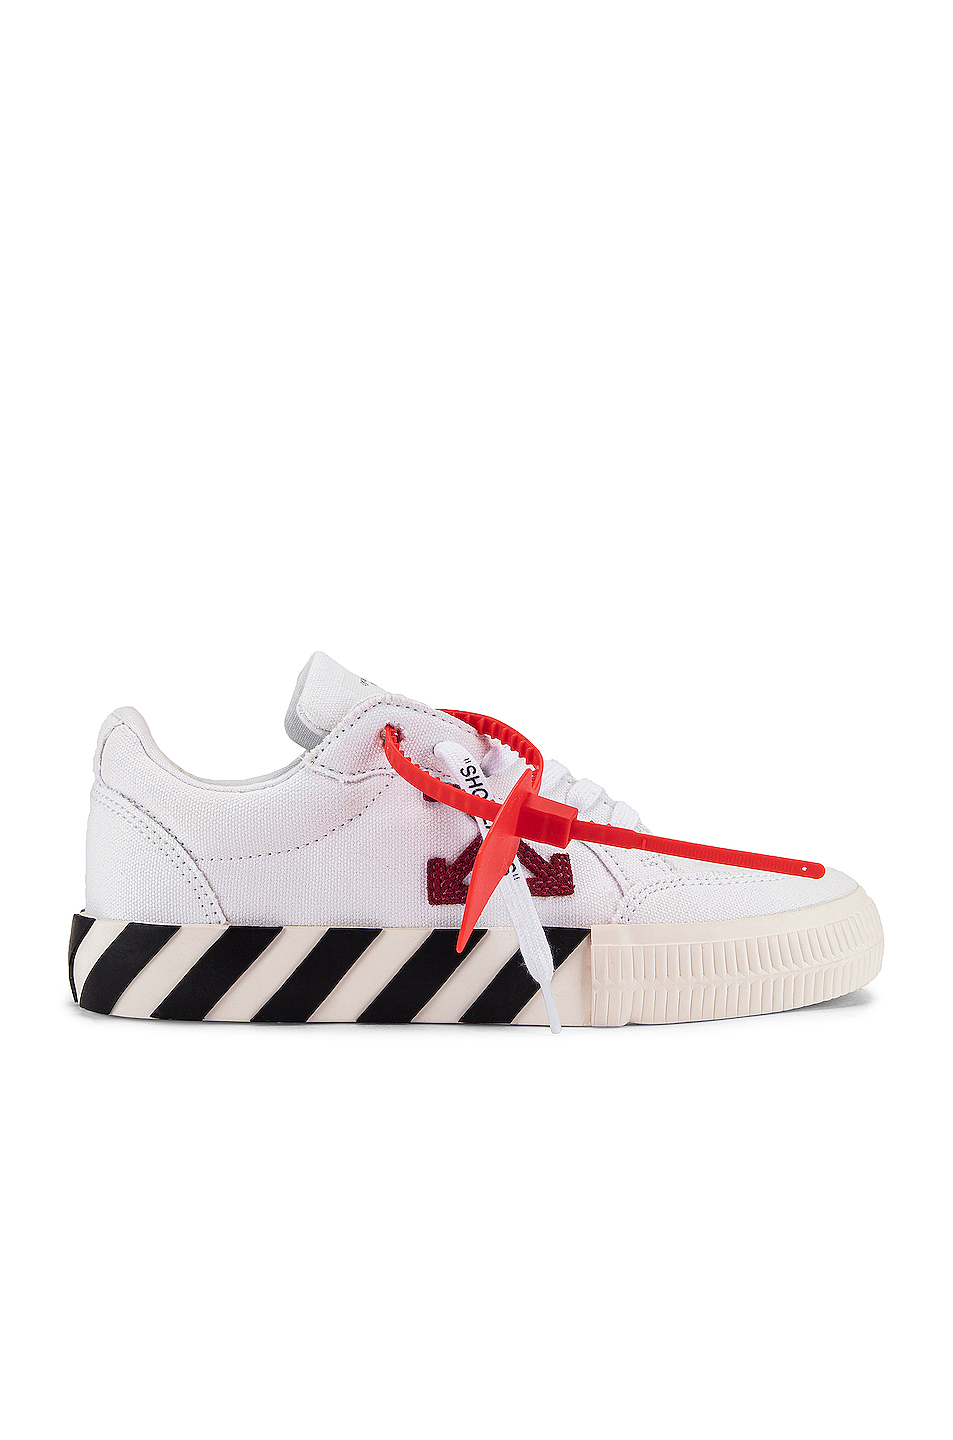 China Wholesale Supplier Branded off white shoes, join us on whatsapp | Yupoo